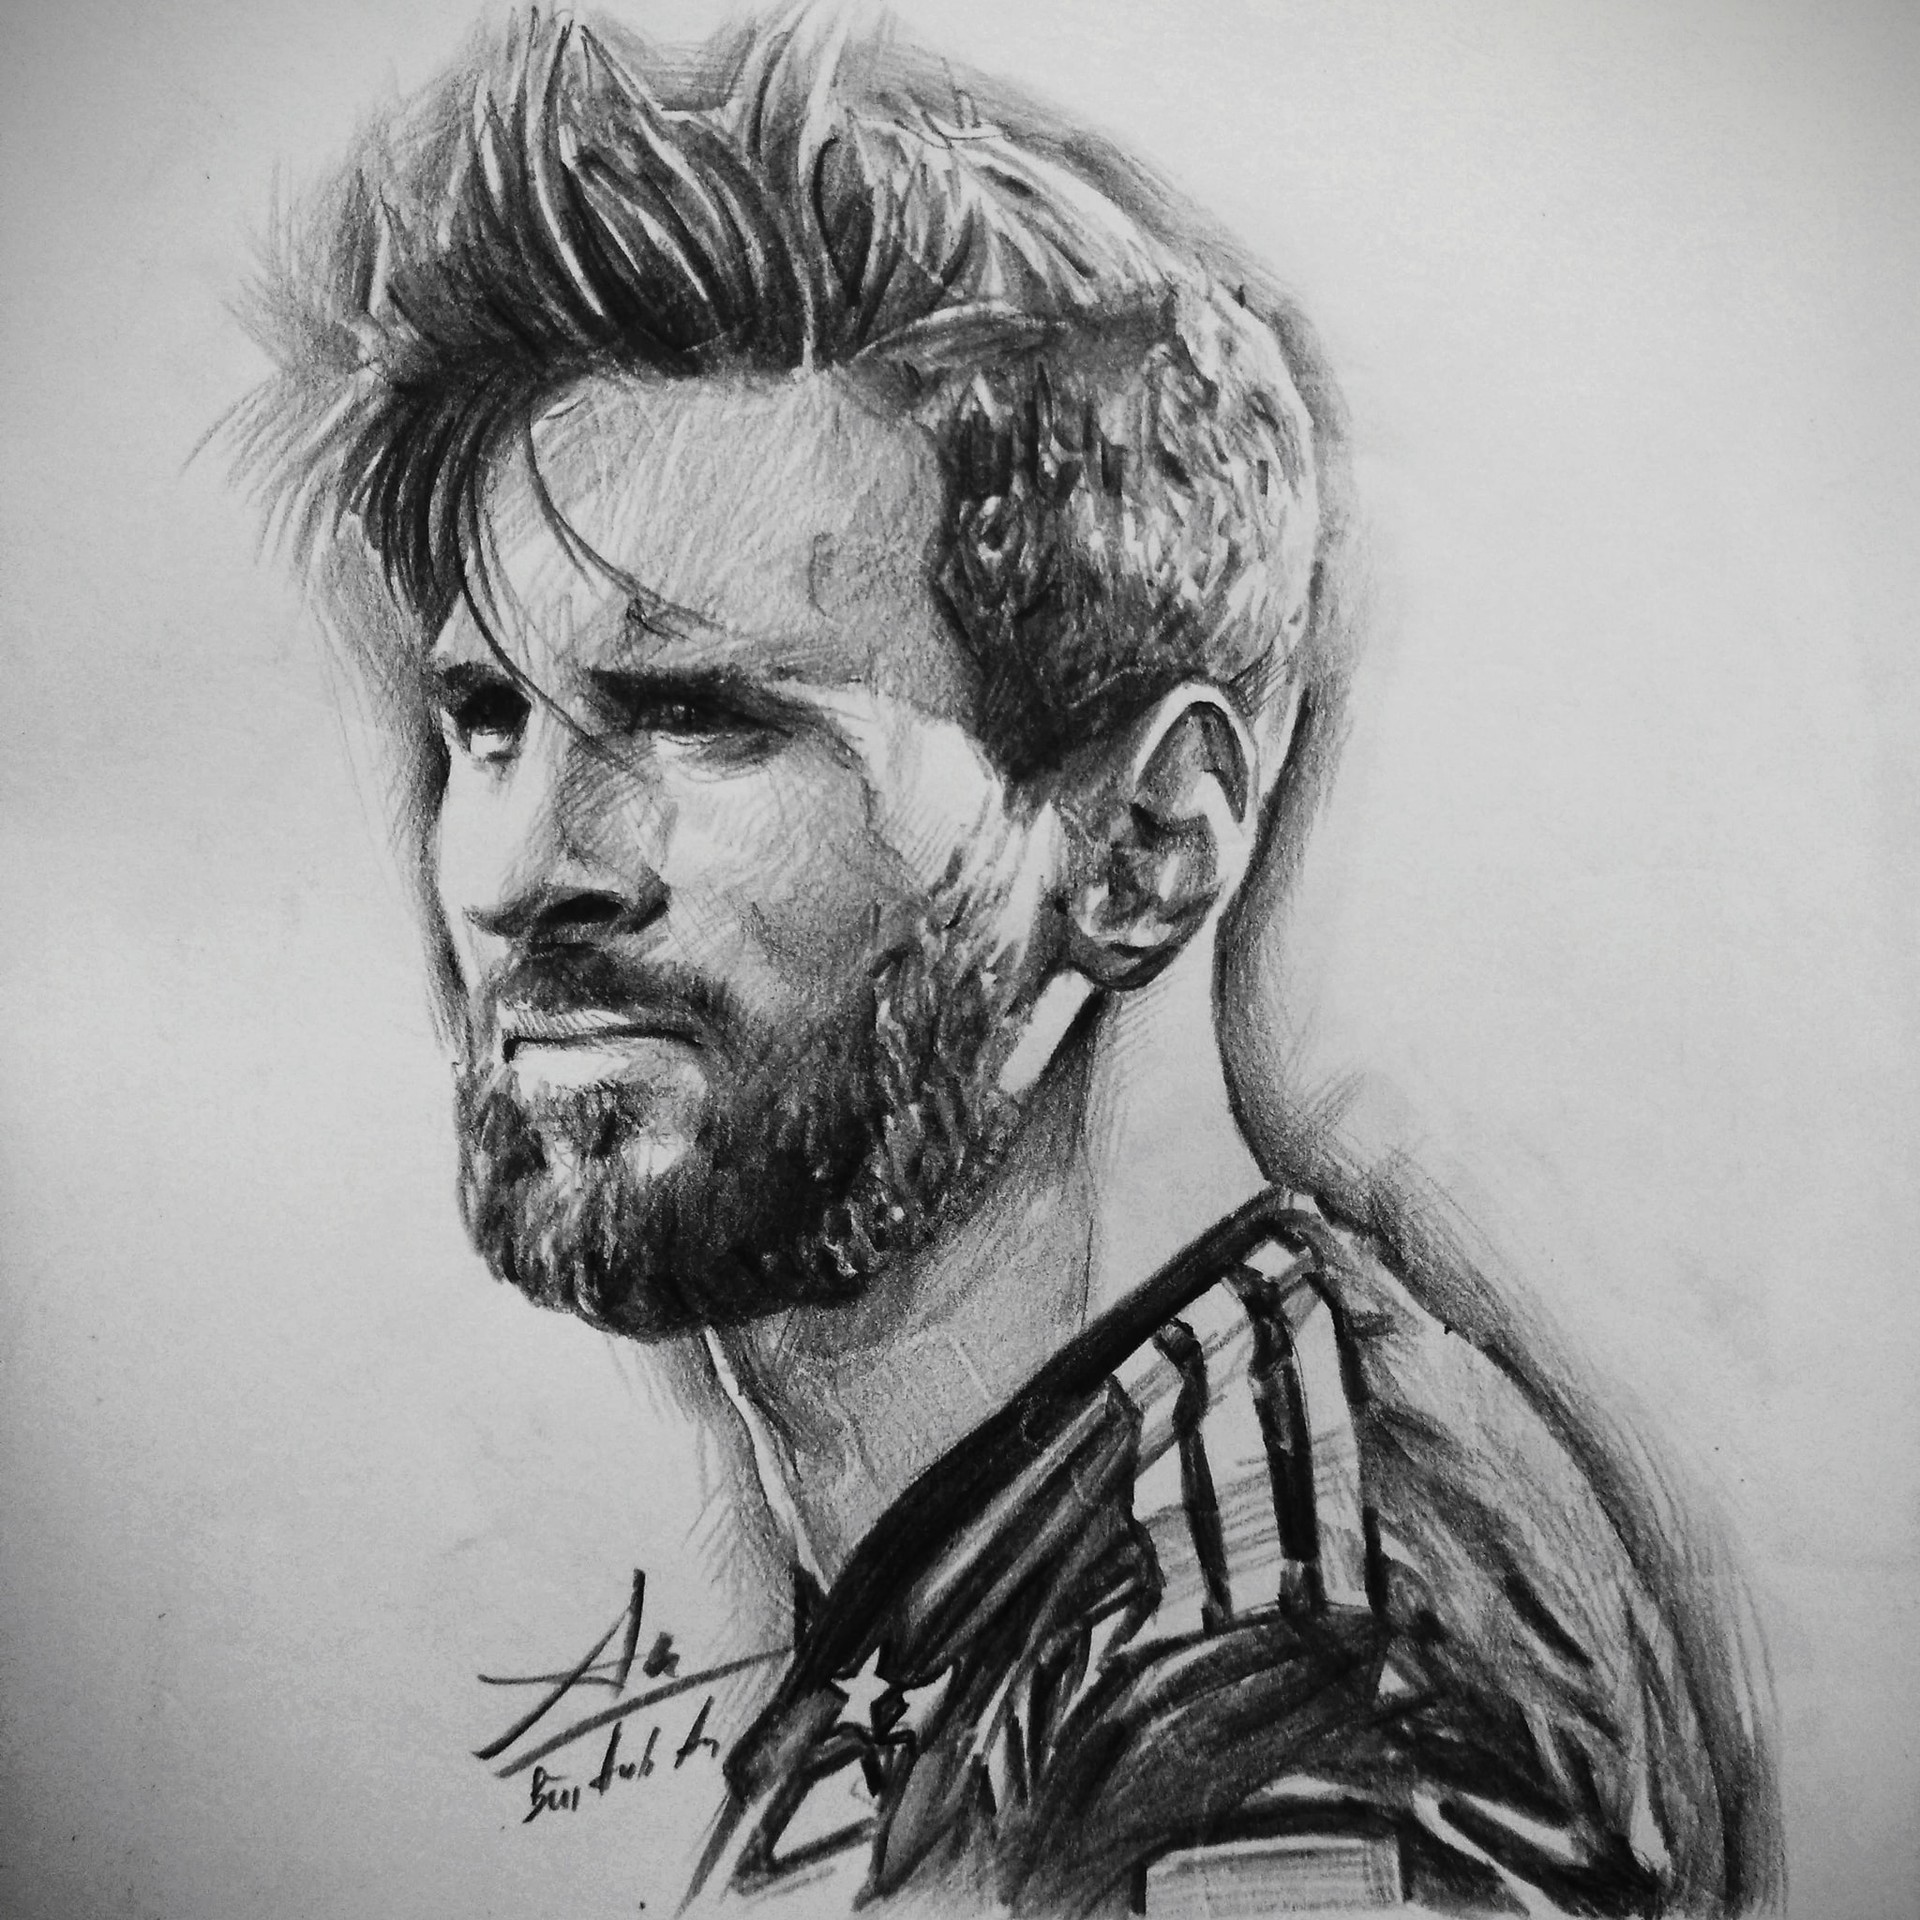 Messi draw Messi Pencil drawing of Messi Original handmade portrait of Messi Pencil portrait of celebrity Messi Drawing